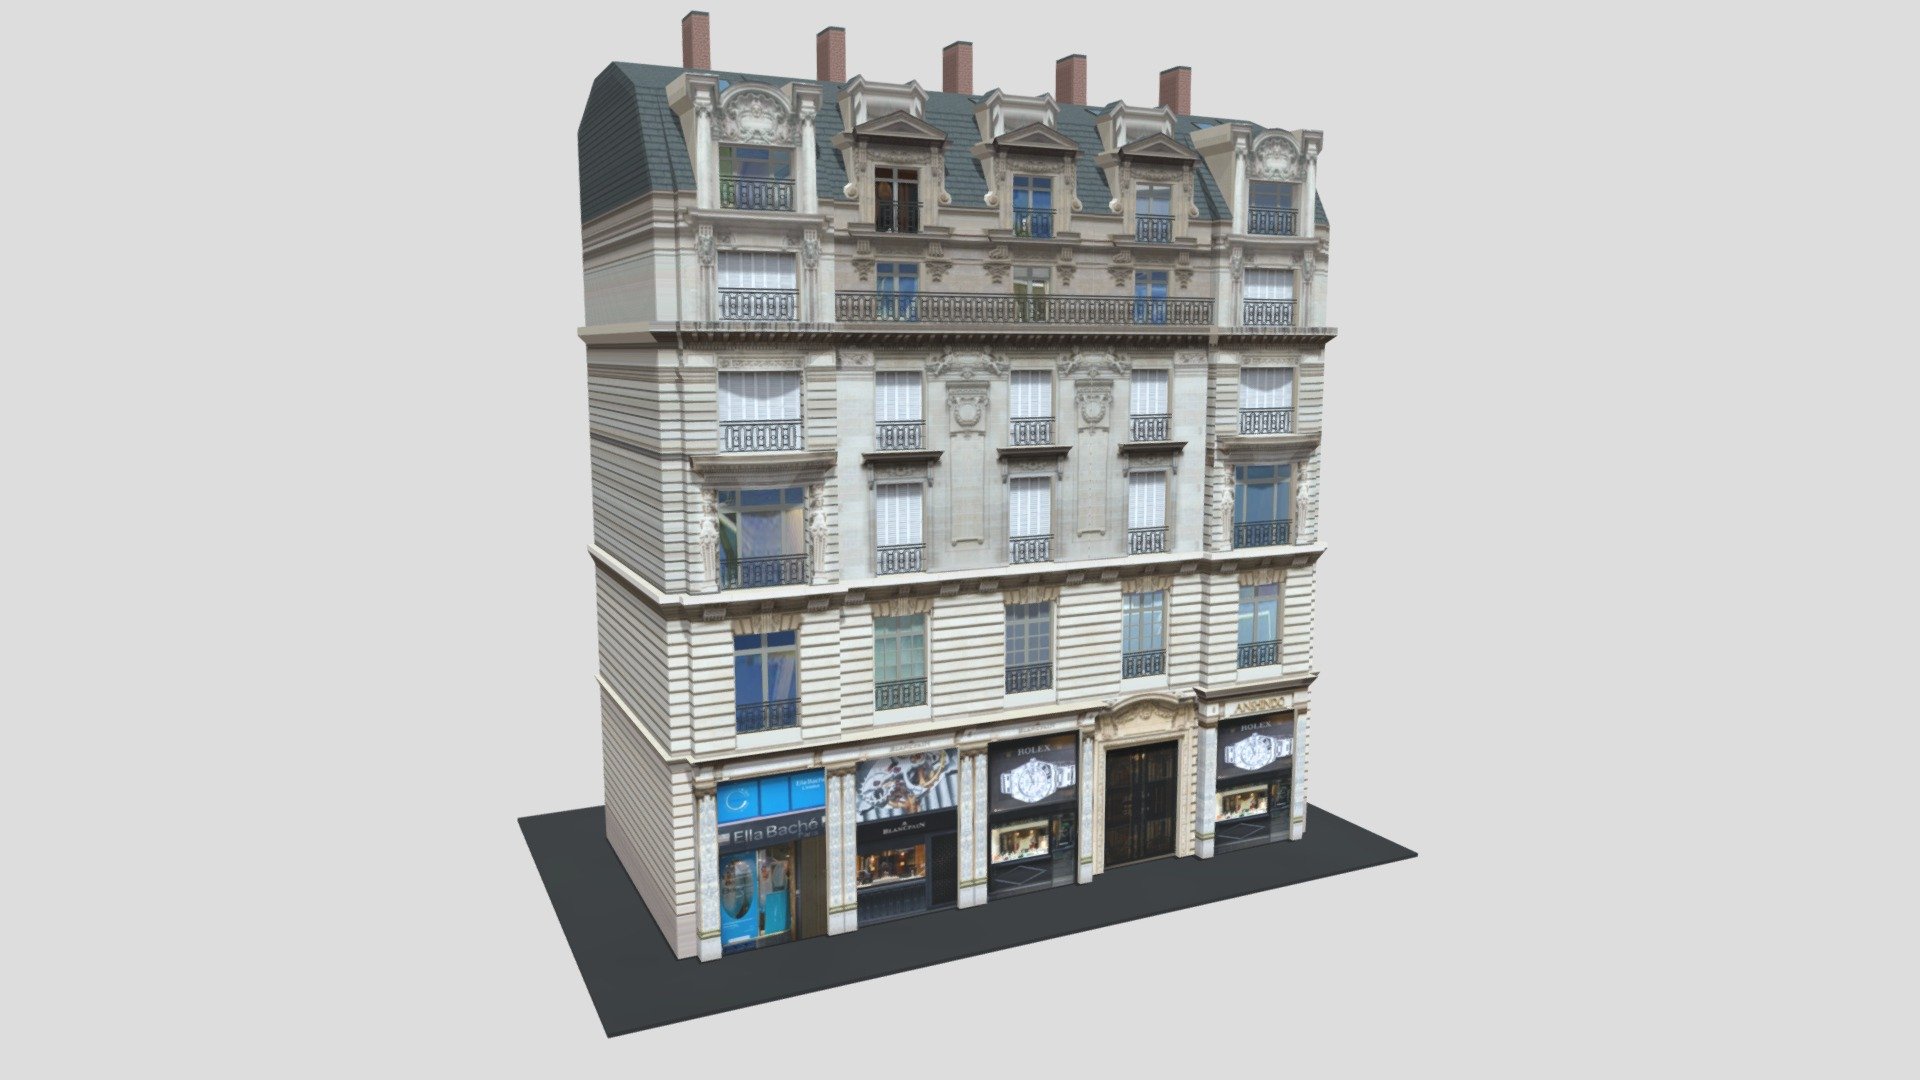 Typical Parisian Apartment Building 14
Originally created with 3ds Max 2015 and rendered in V-Ray 3.0. 

Total Poly Counts:
Poly Count = 30002
Vertex Count = 33254

https://nuralam3d.blogspot.com/2021/09/typical-parisian-apartment-building-14.html - Typical Parisian Apartment Building 14 - 3D model by nuralam018 3d model